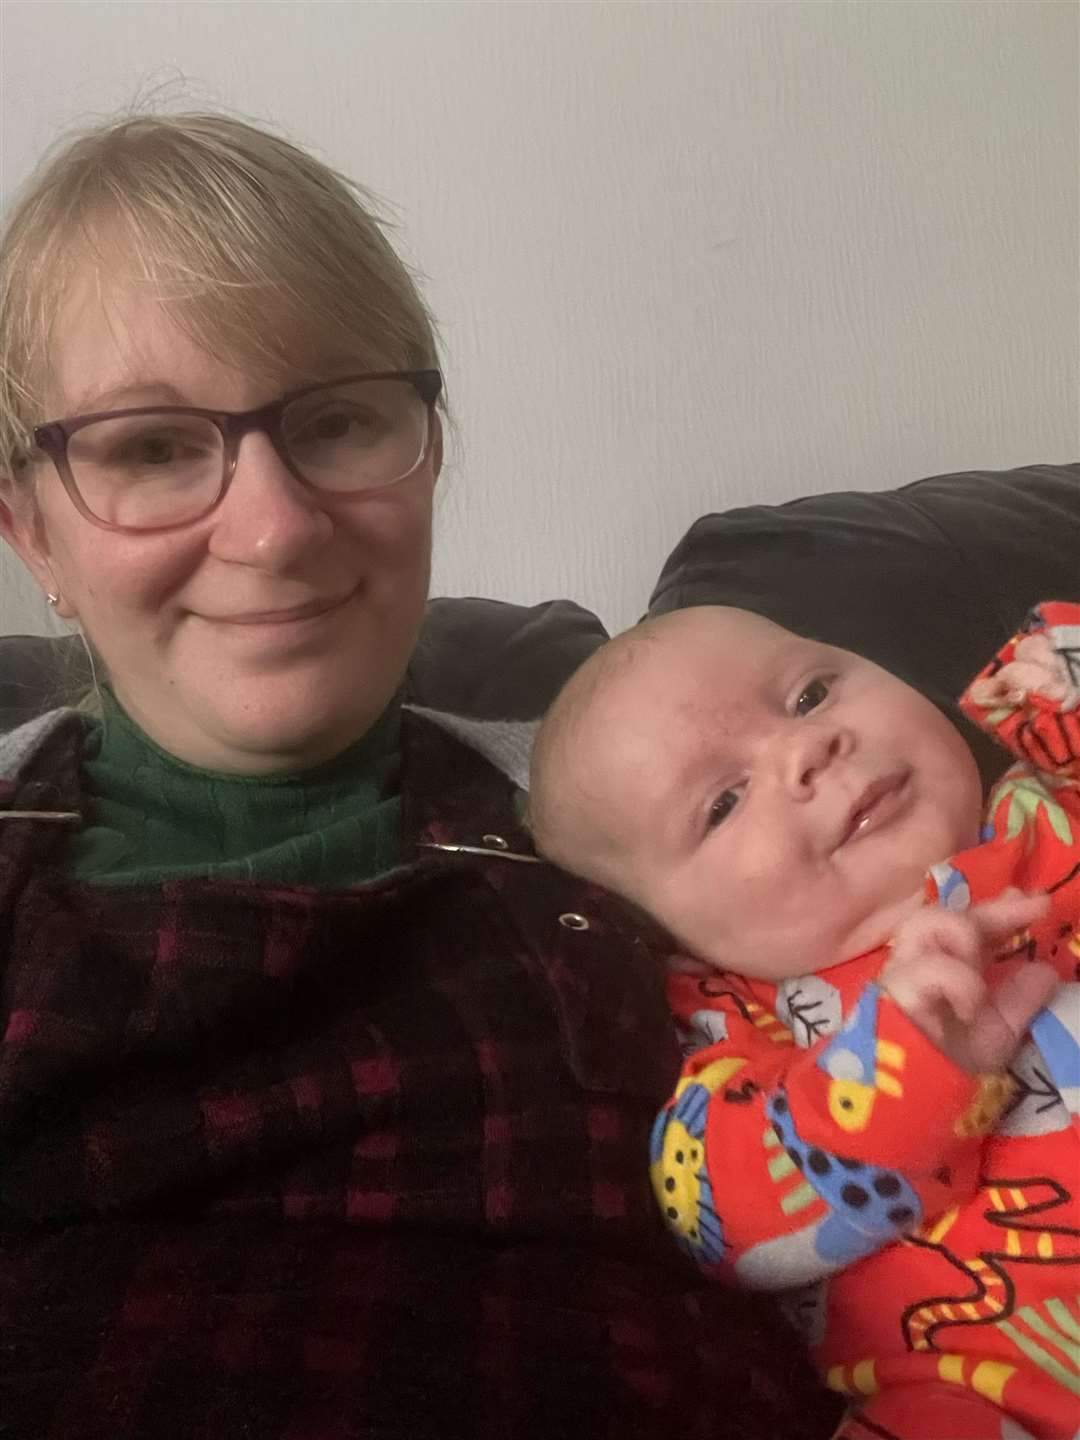 Caithness mother-of-three Emma Curran (36) with her youngest son who was born in February this year. She said that nothing has improved since she gave birth to her two older sons who are now 9 and 7.